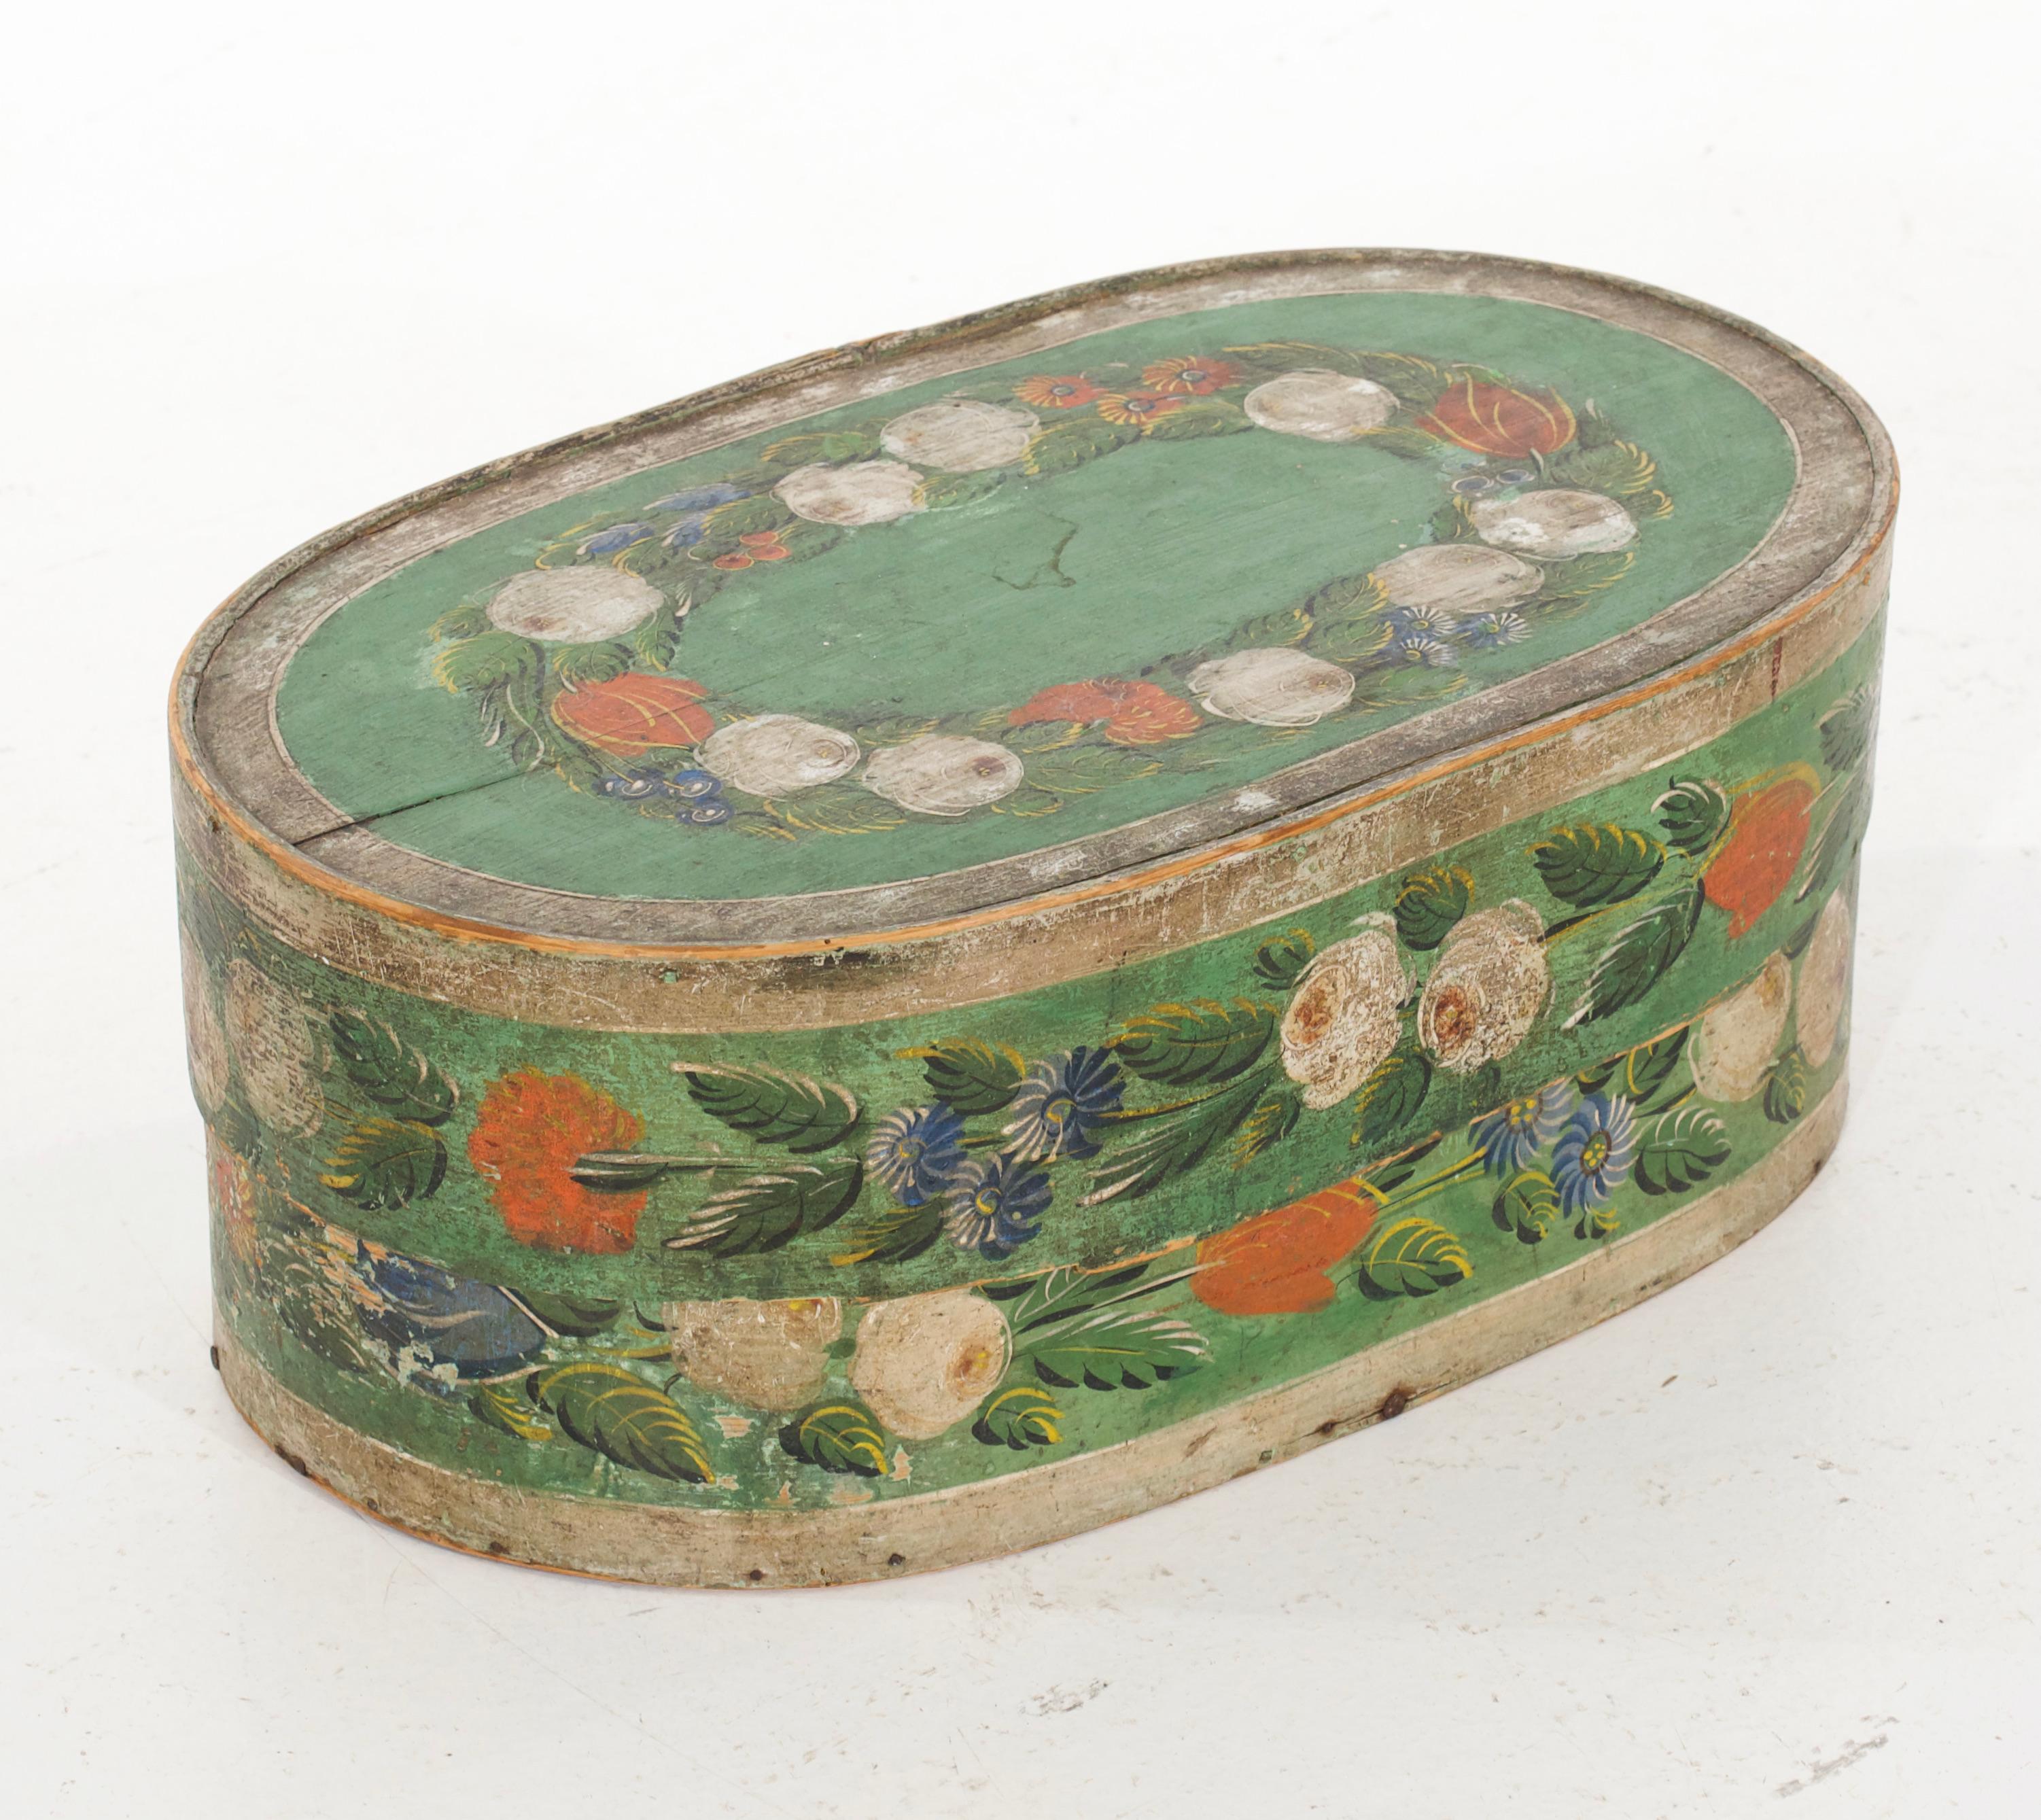 Charming Swedish box in original painted with flower decoration, circa 1800.